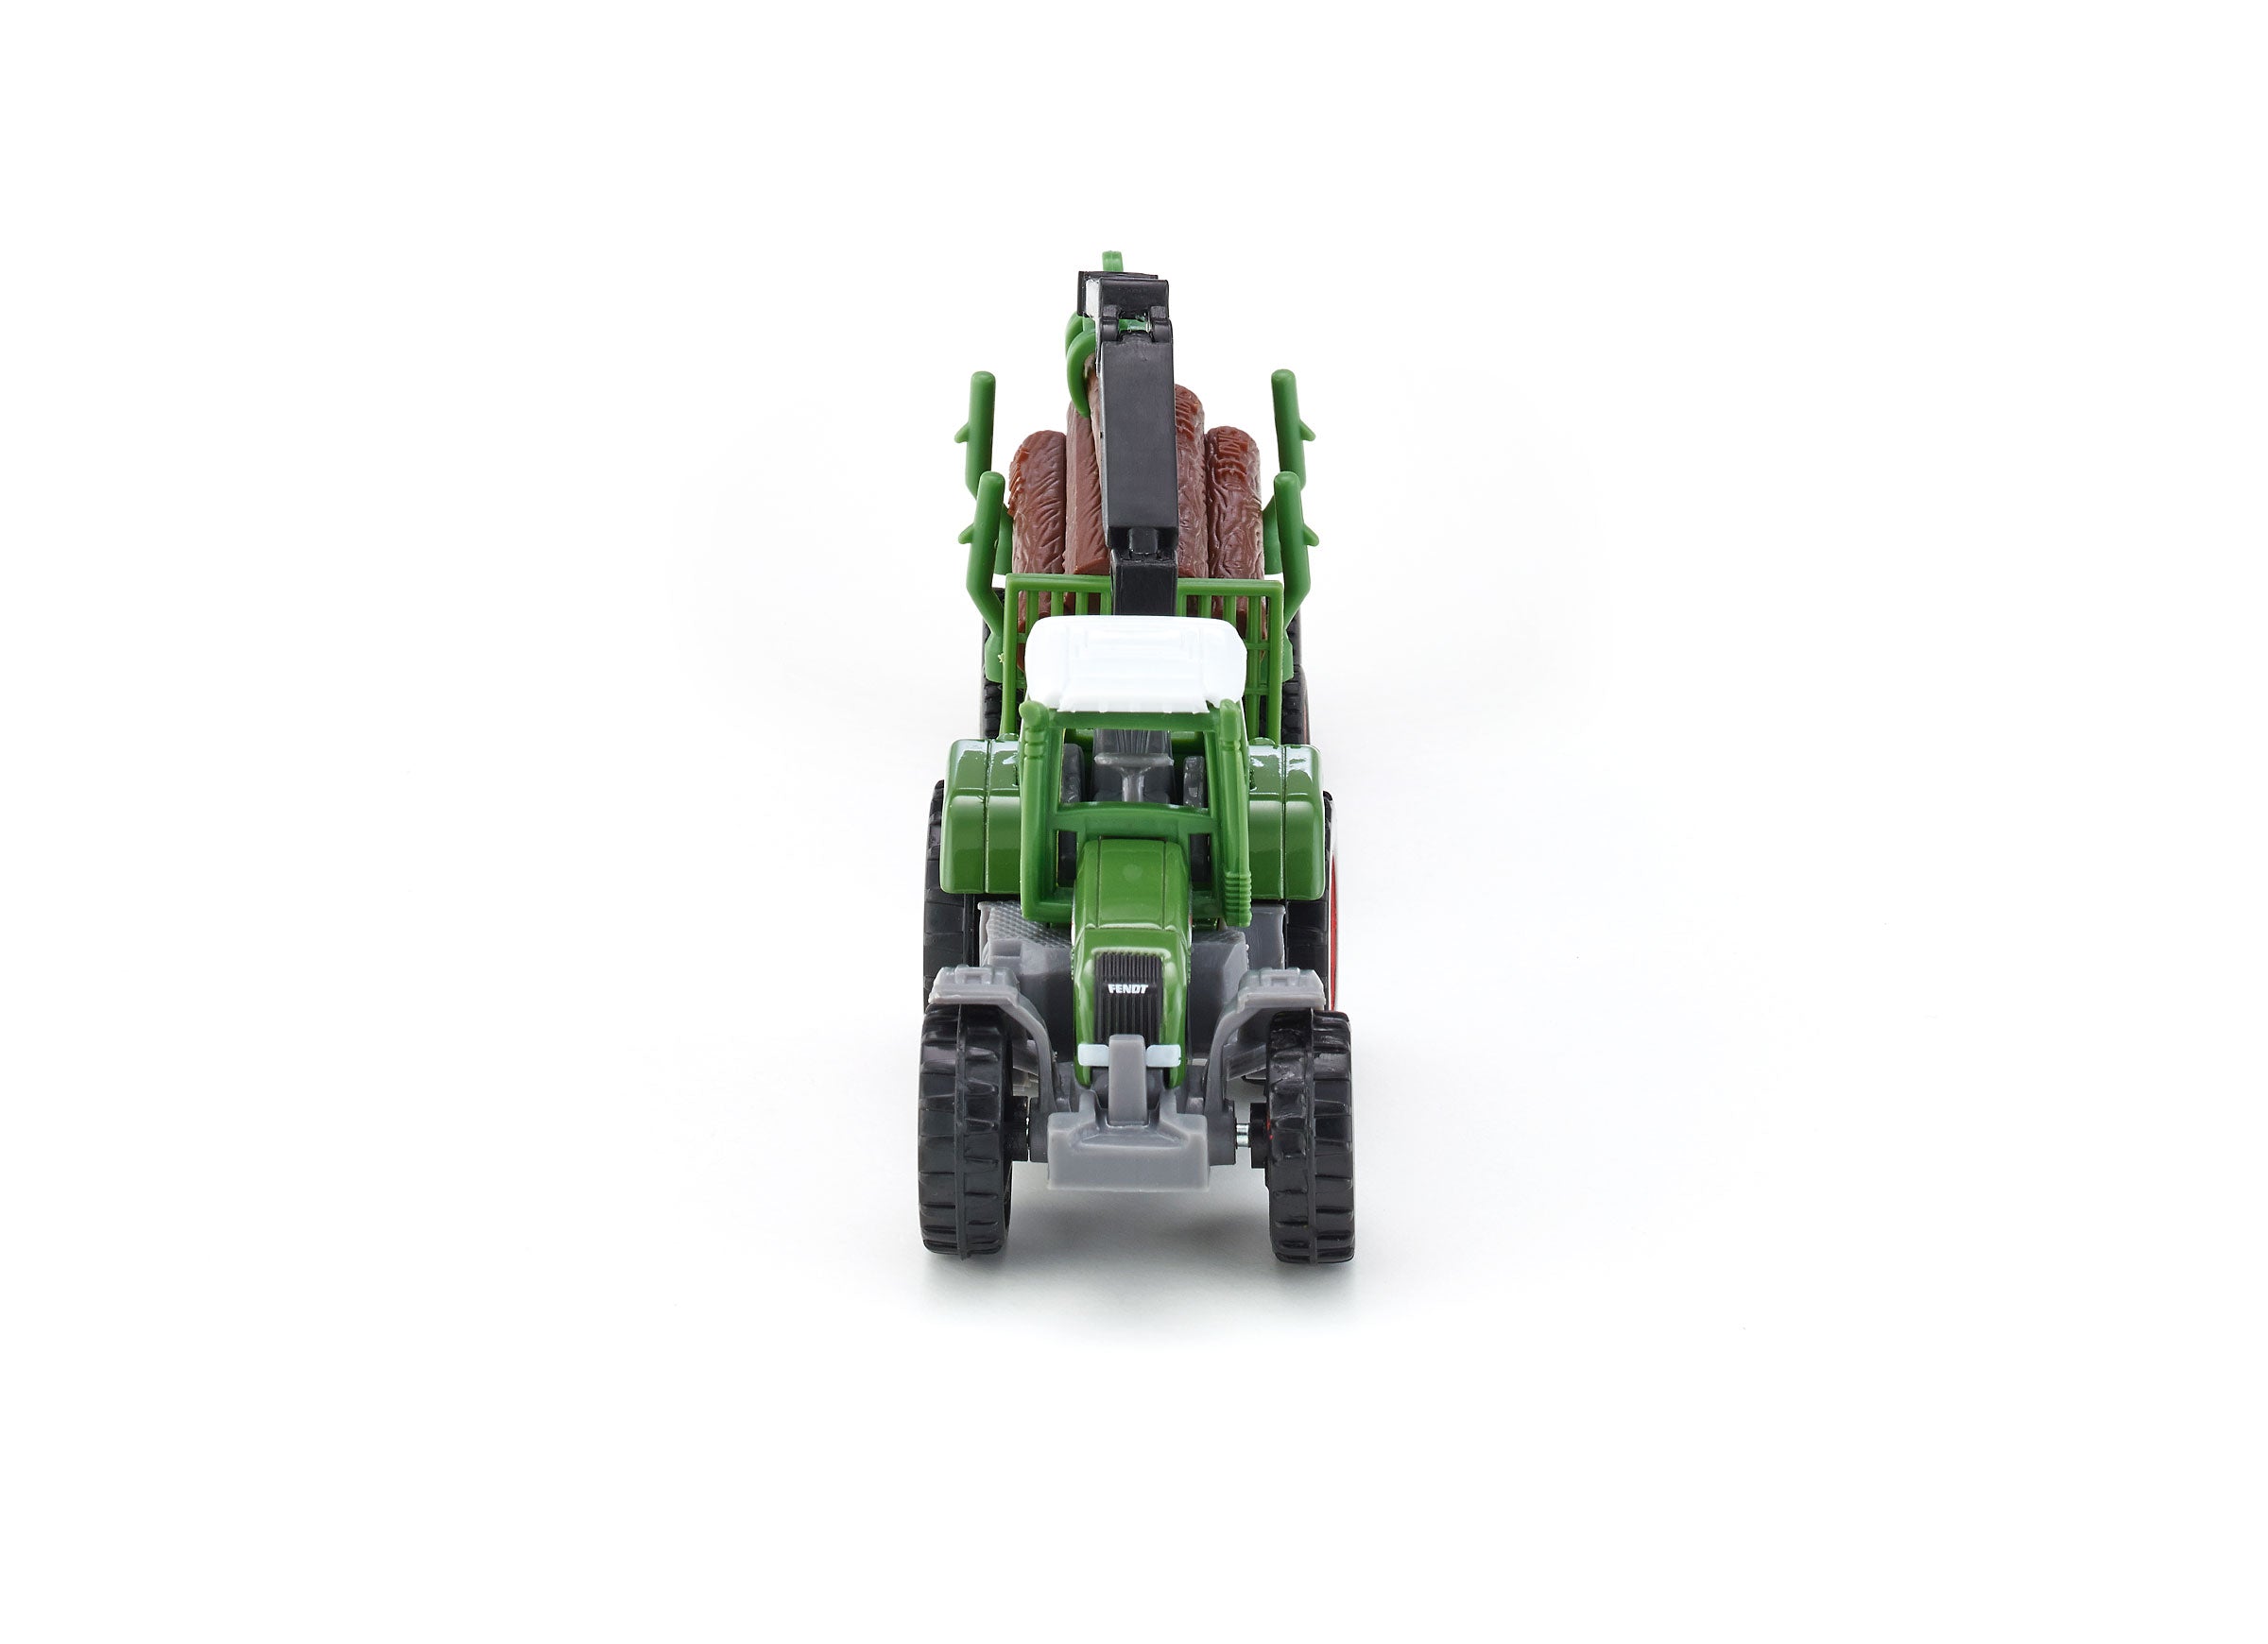 Siku 1:87 Fendt With Forestry Trailer